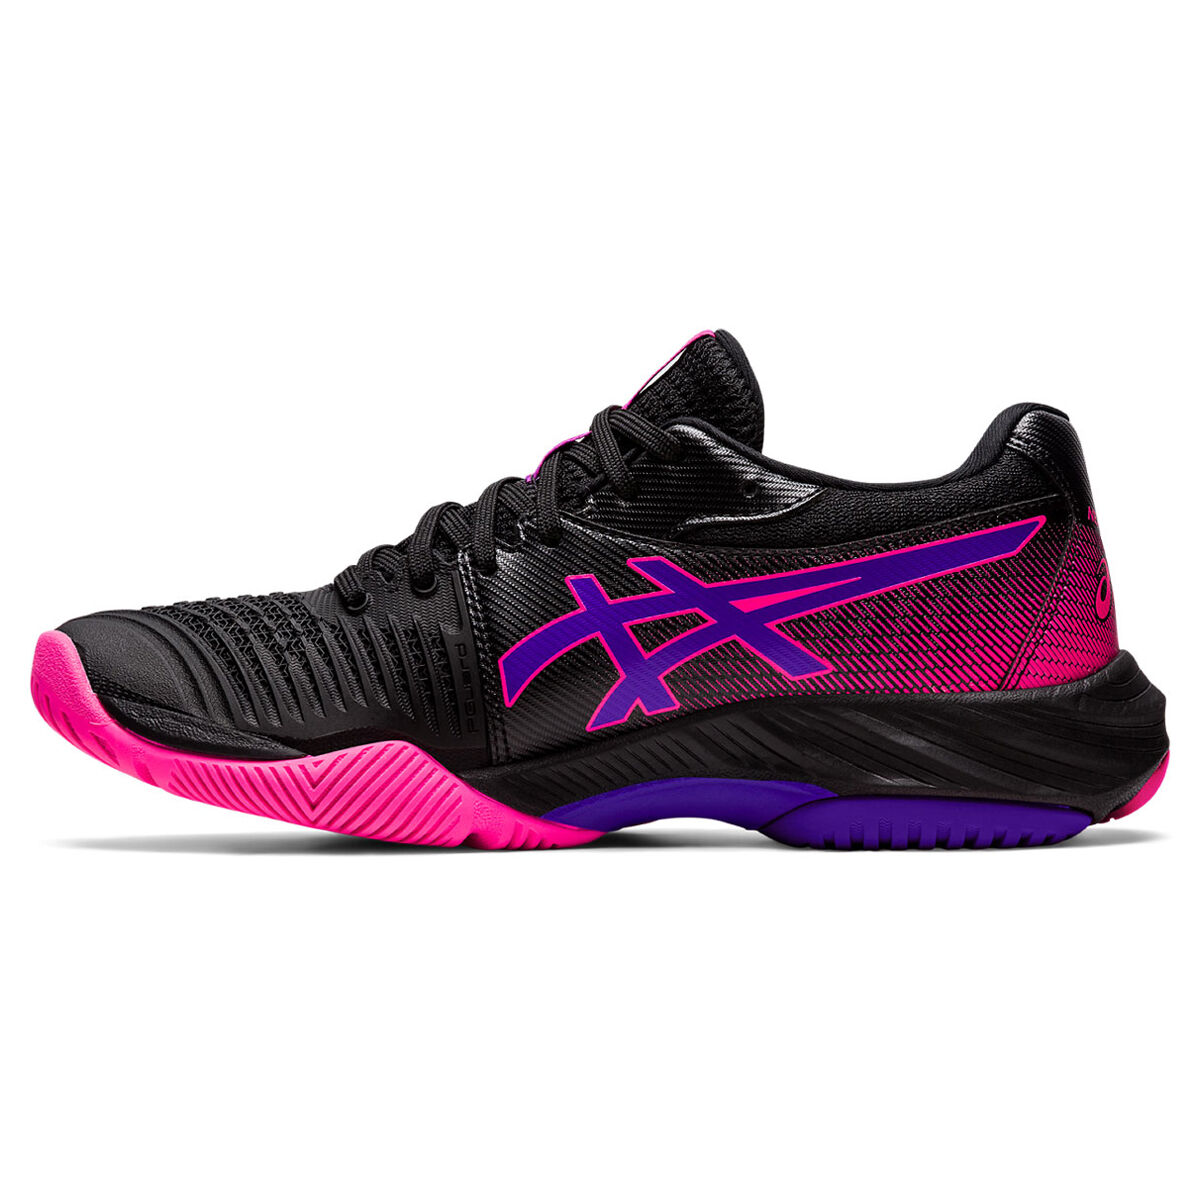 Women's Shoes | Running, Sneakers, Trainers & more | rebel